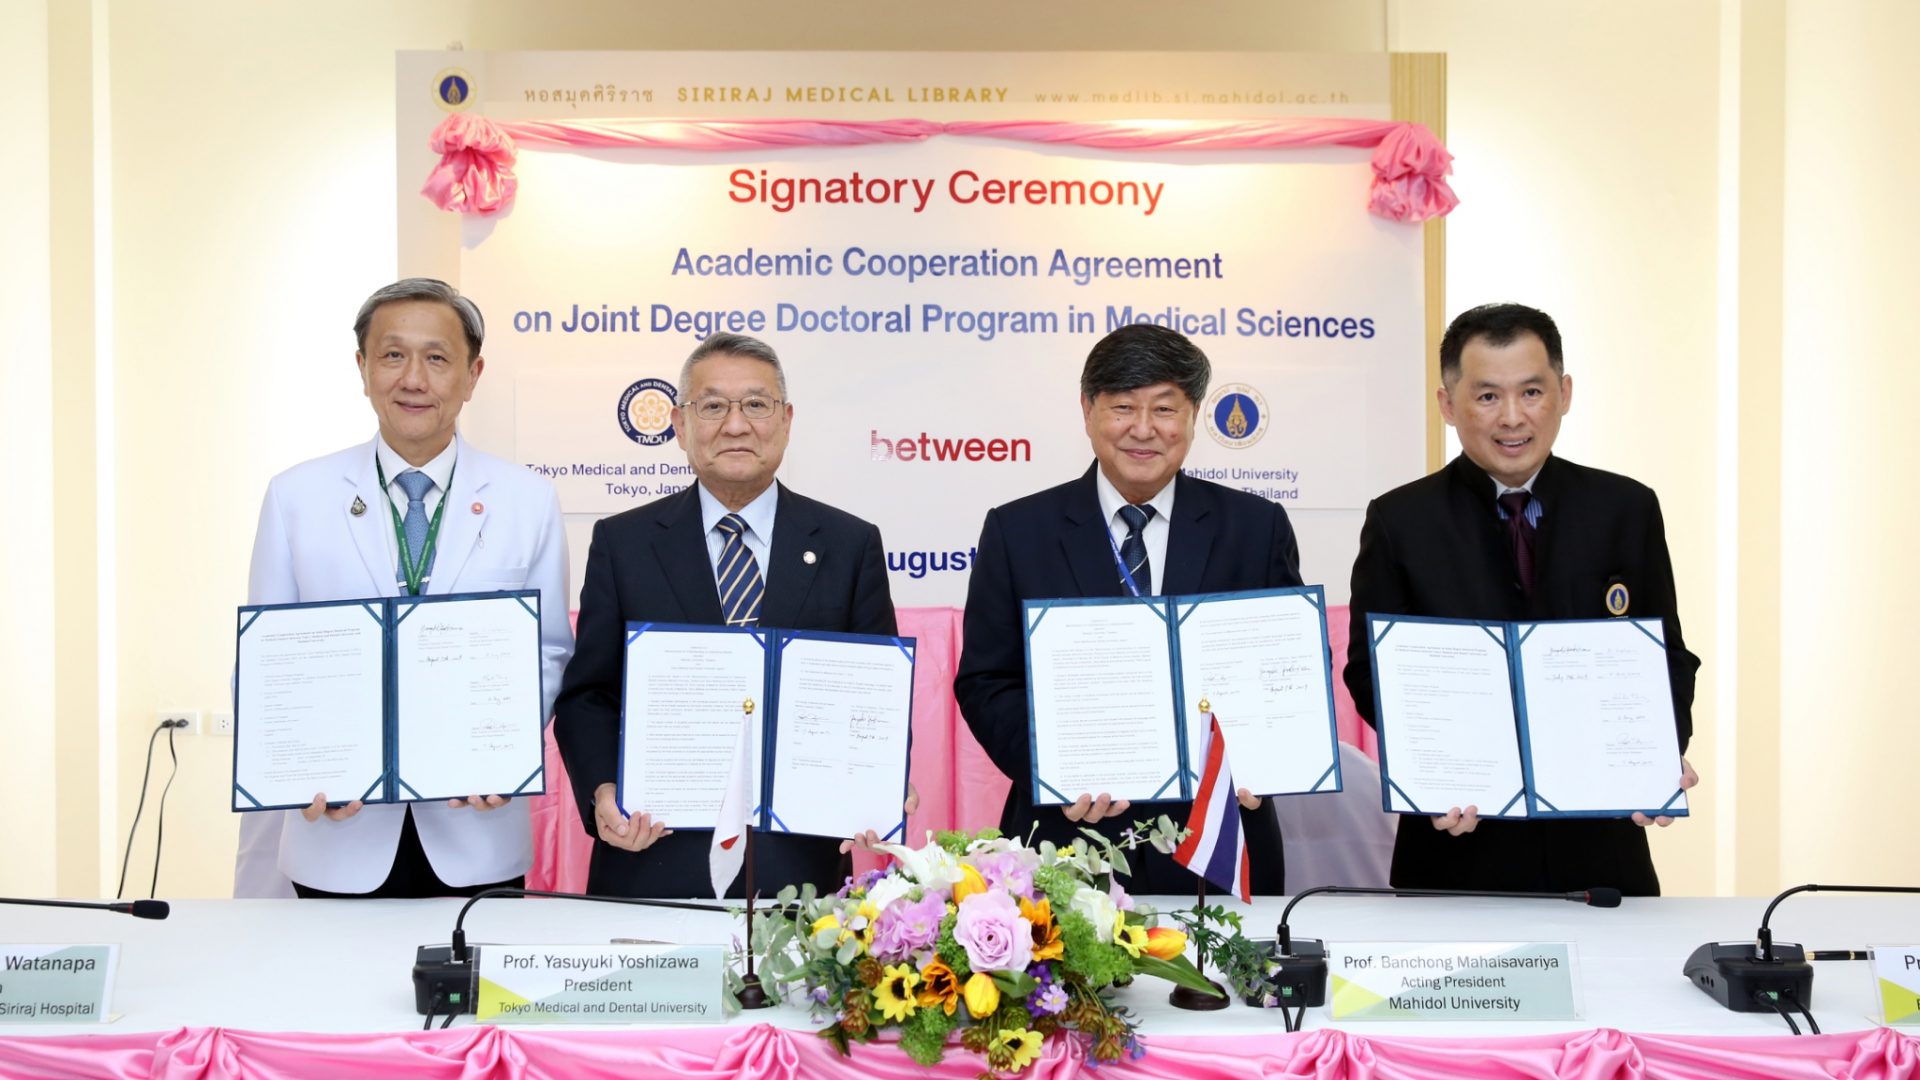 Siriraj Signed the Academic Cooperation Agreement on Joint Degree Doctoral Program in Medical Sciences with TMDU